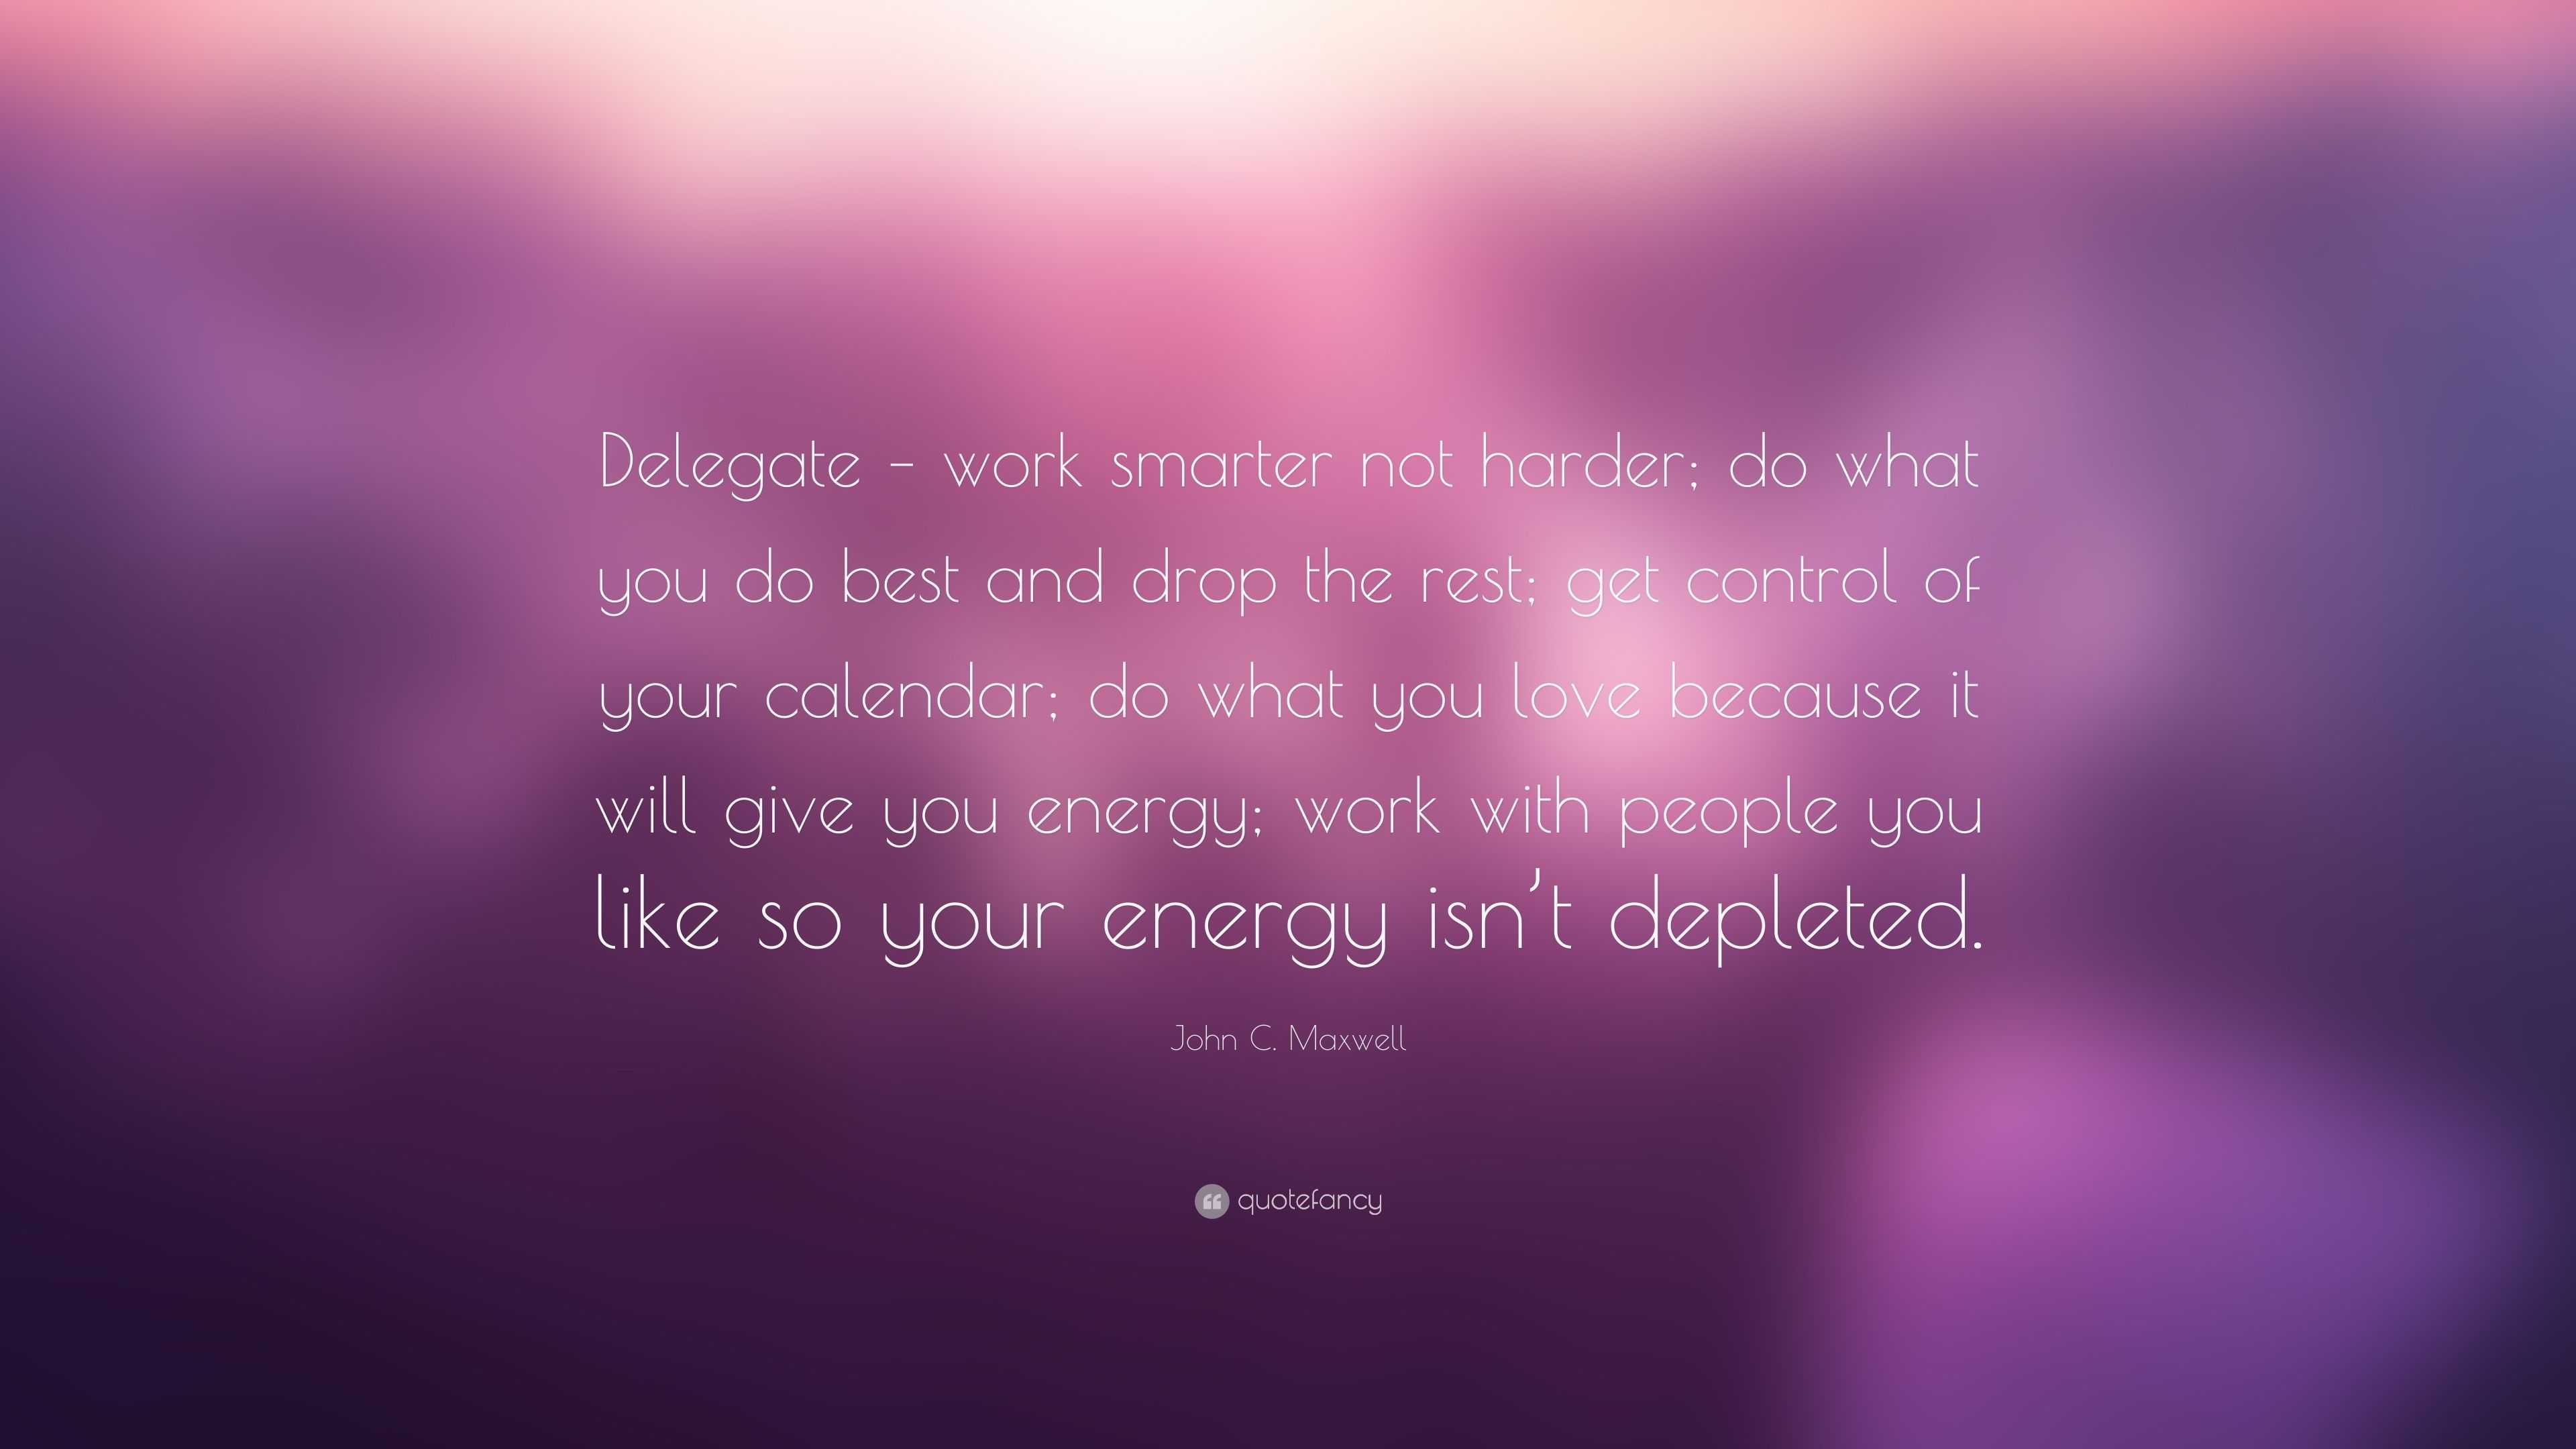 John C. Maxwell Quote: “Delegate – work smarter not harder; do what you